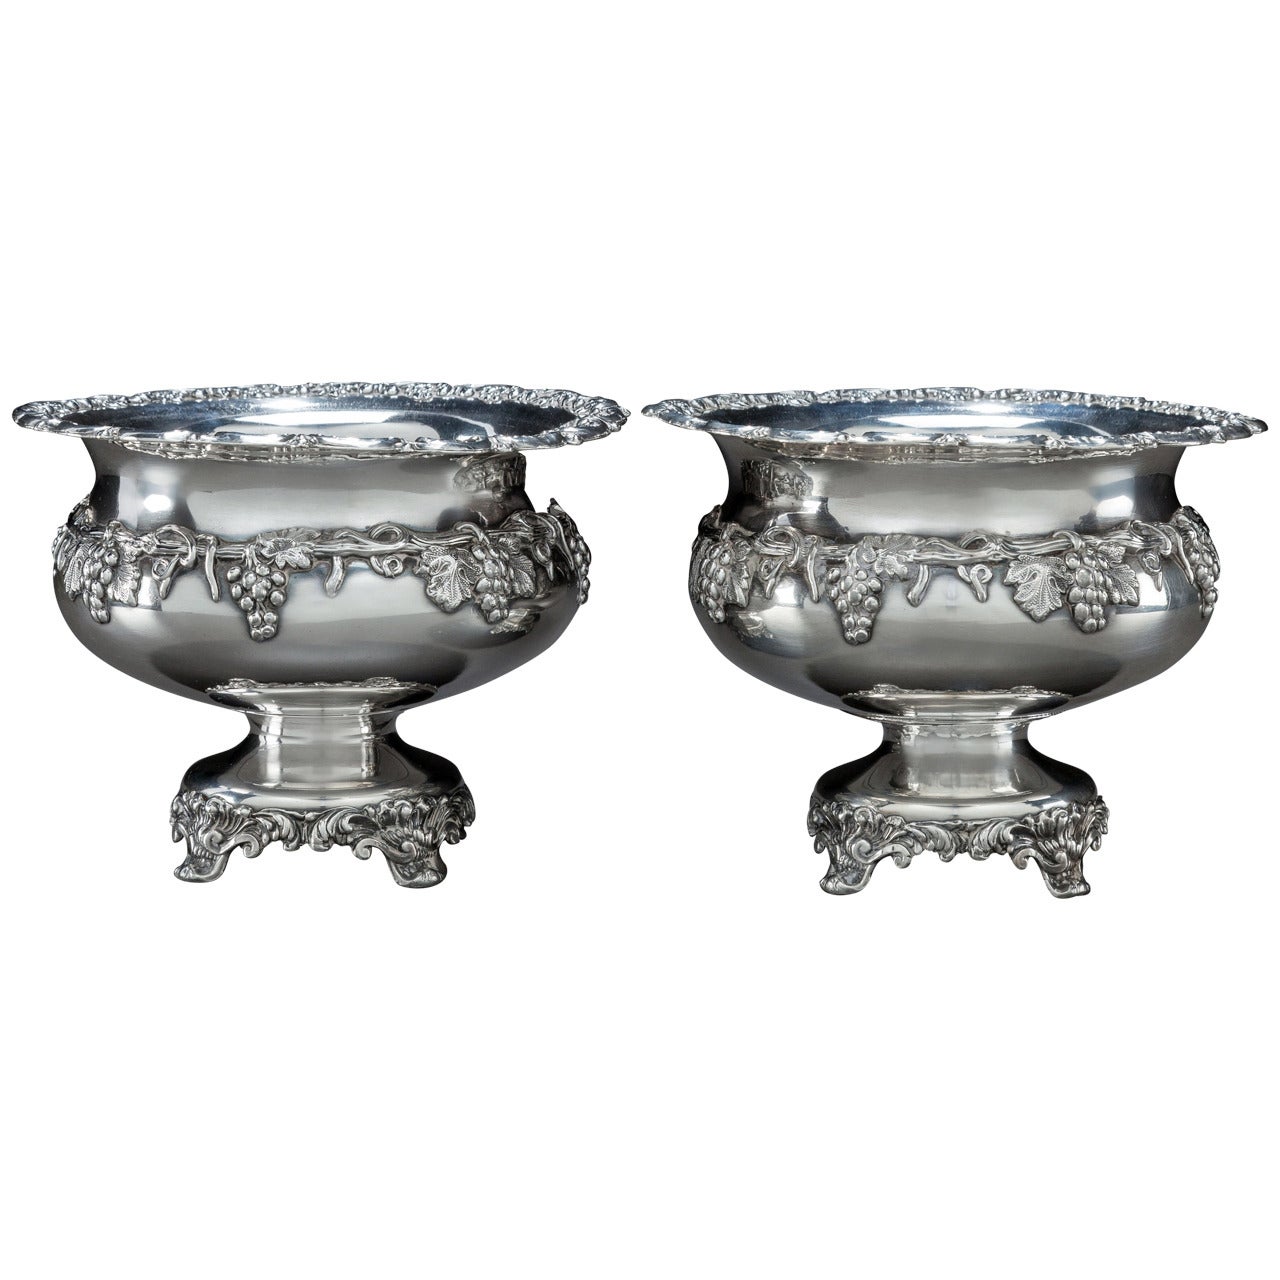 Pair of Early 20th Century French Silver Plated Compotes